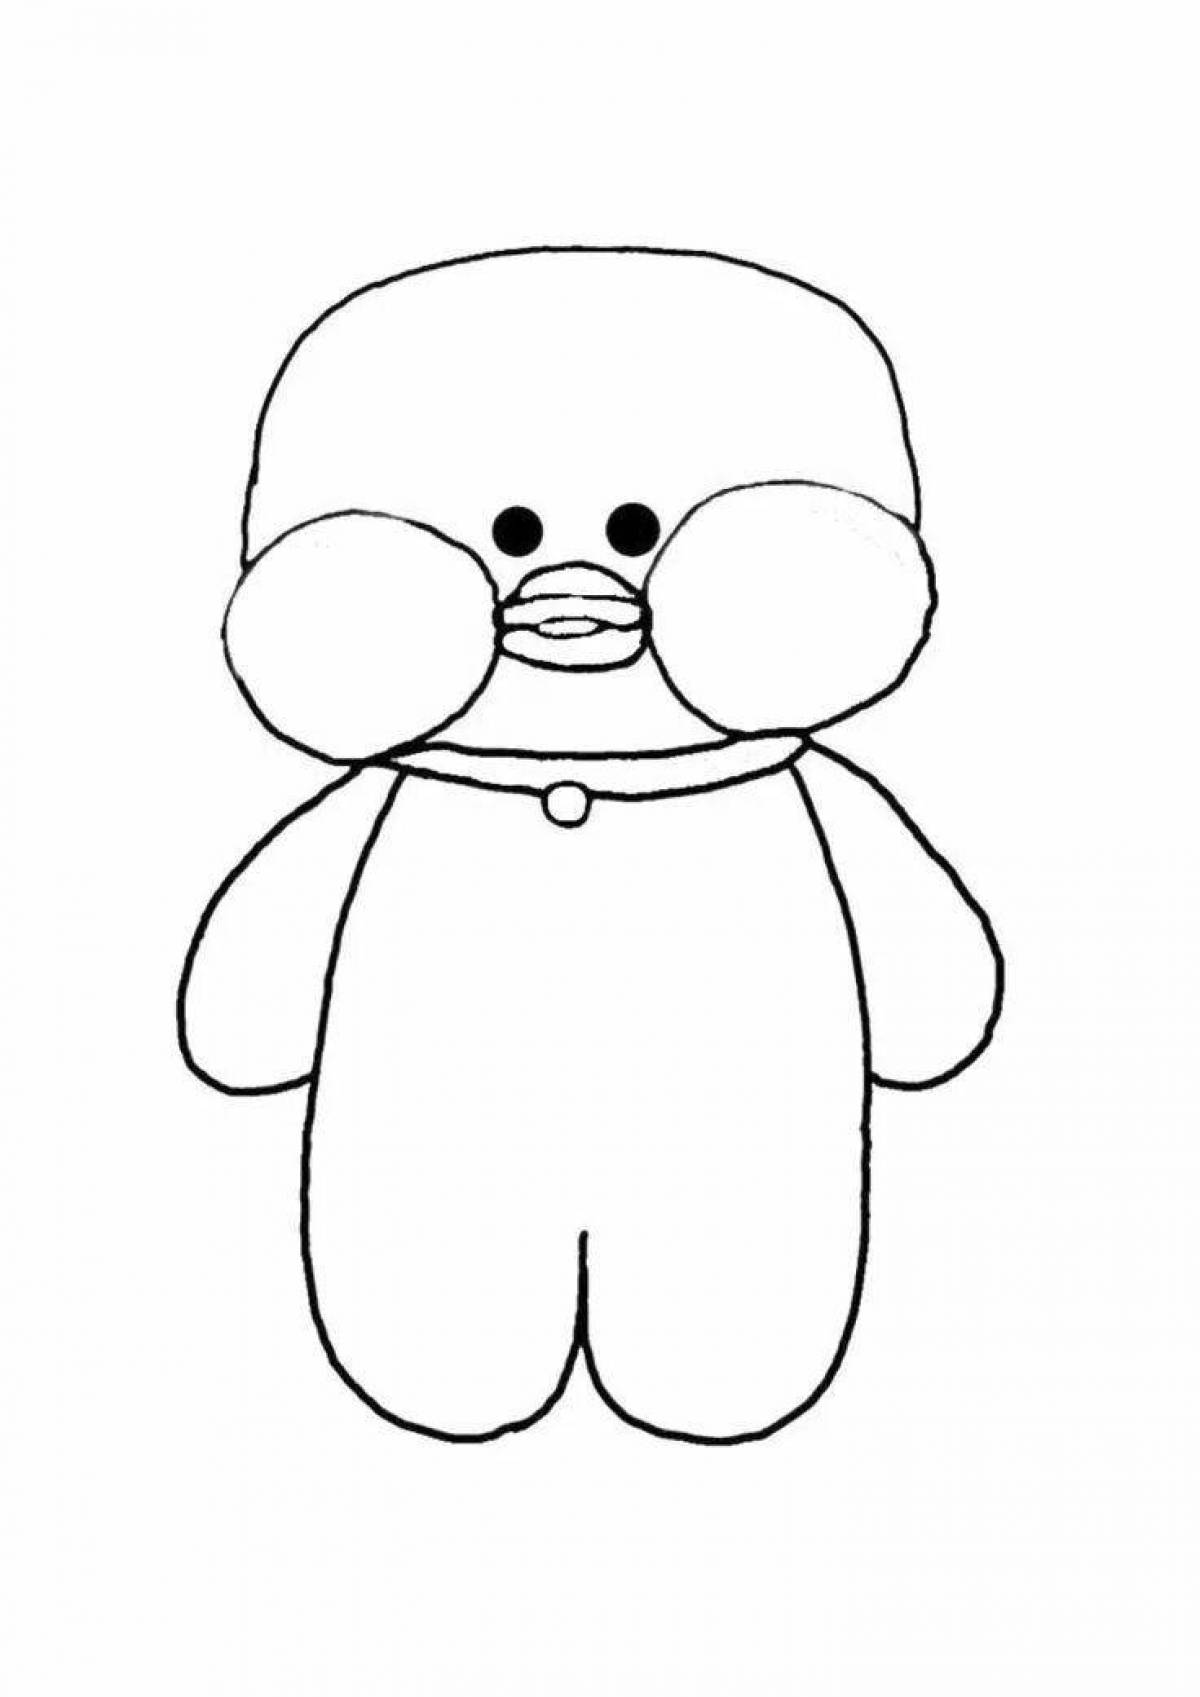 Radiant coloring page ducks lala fanfan